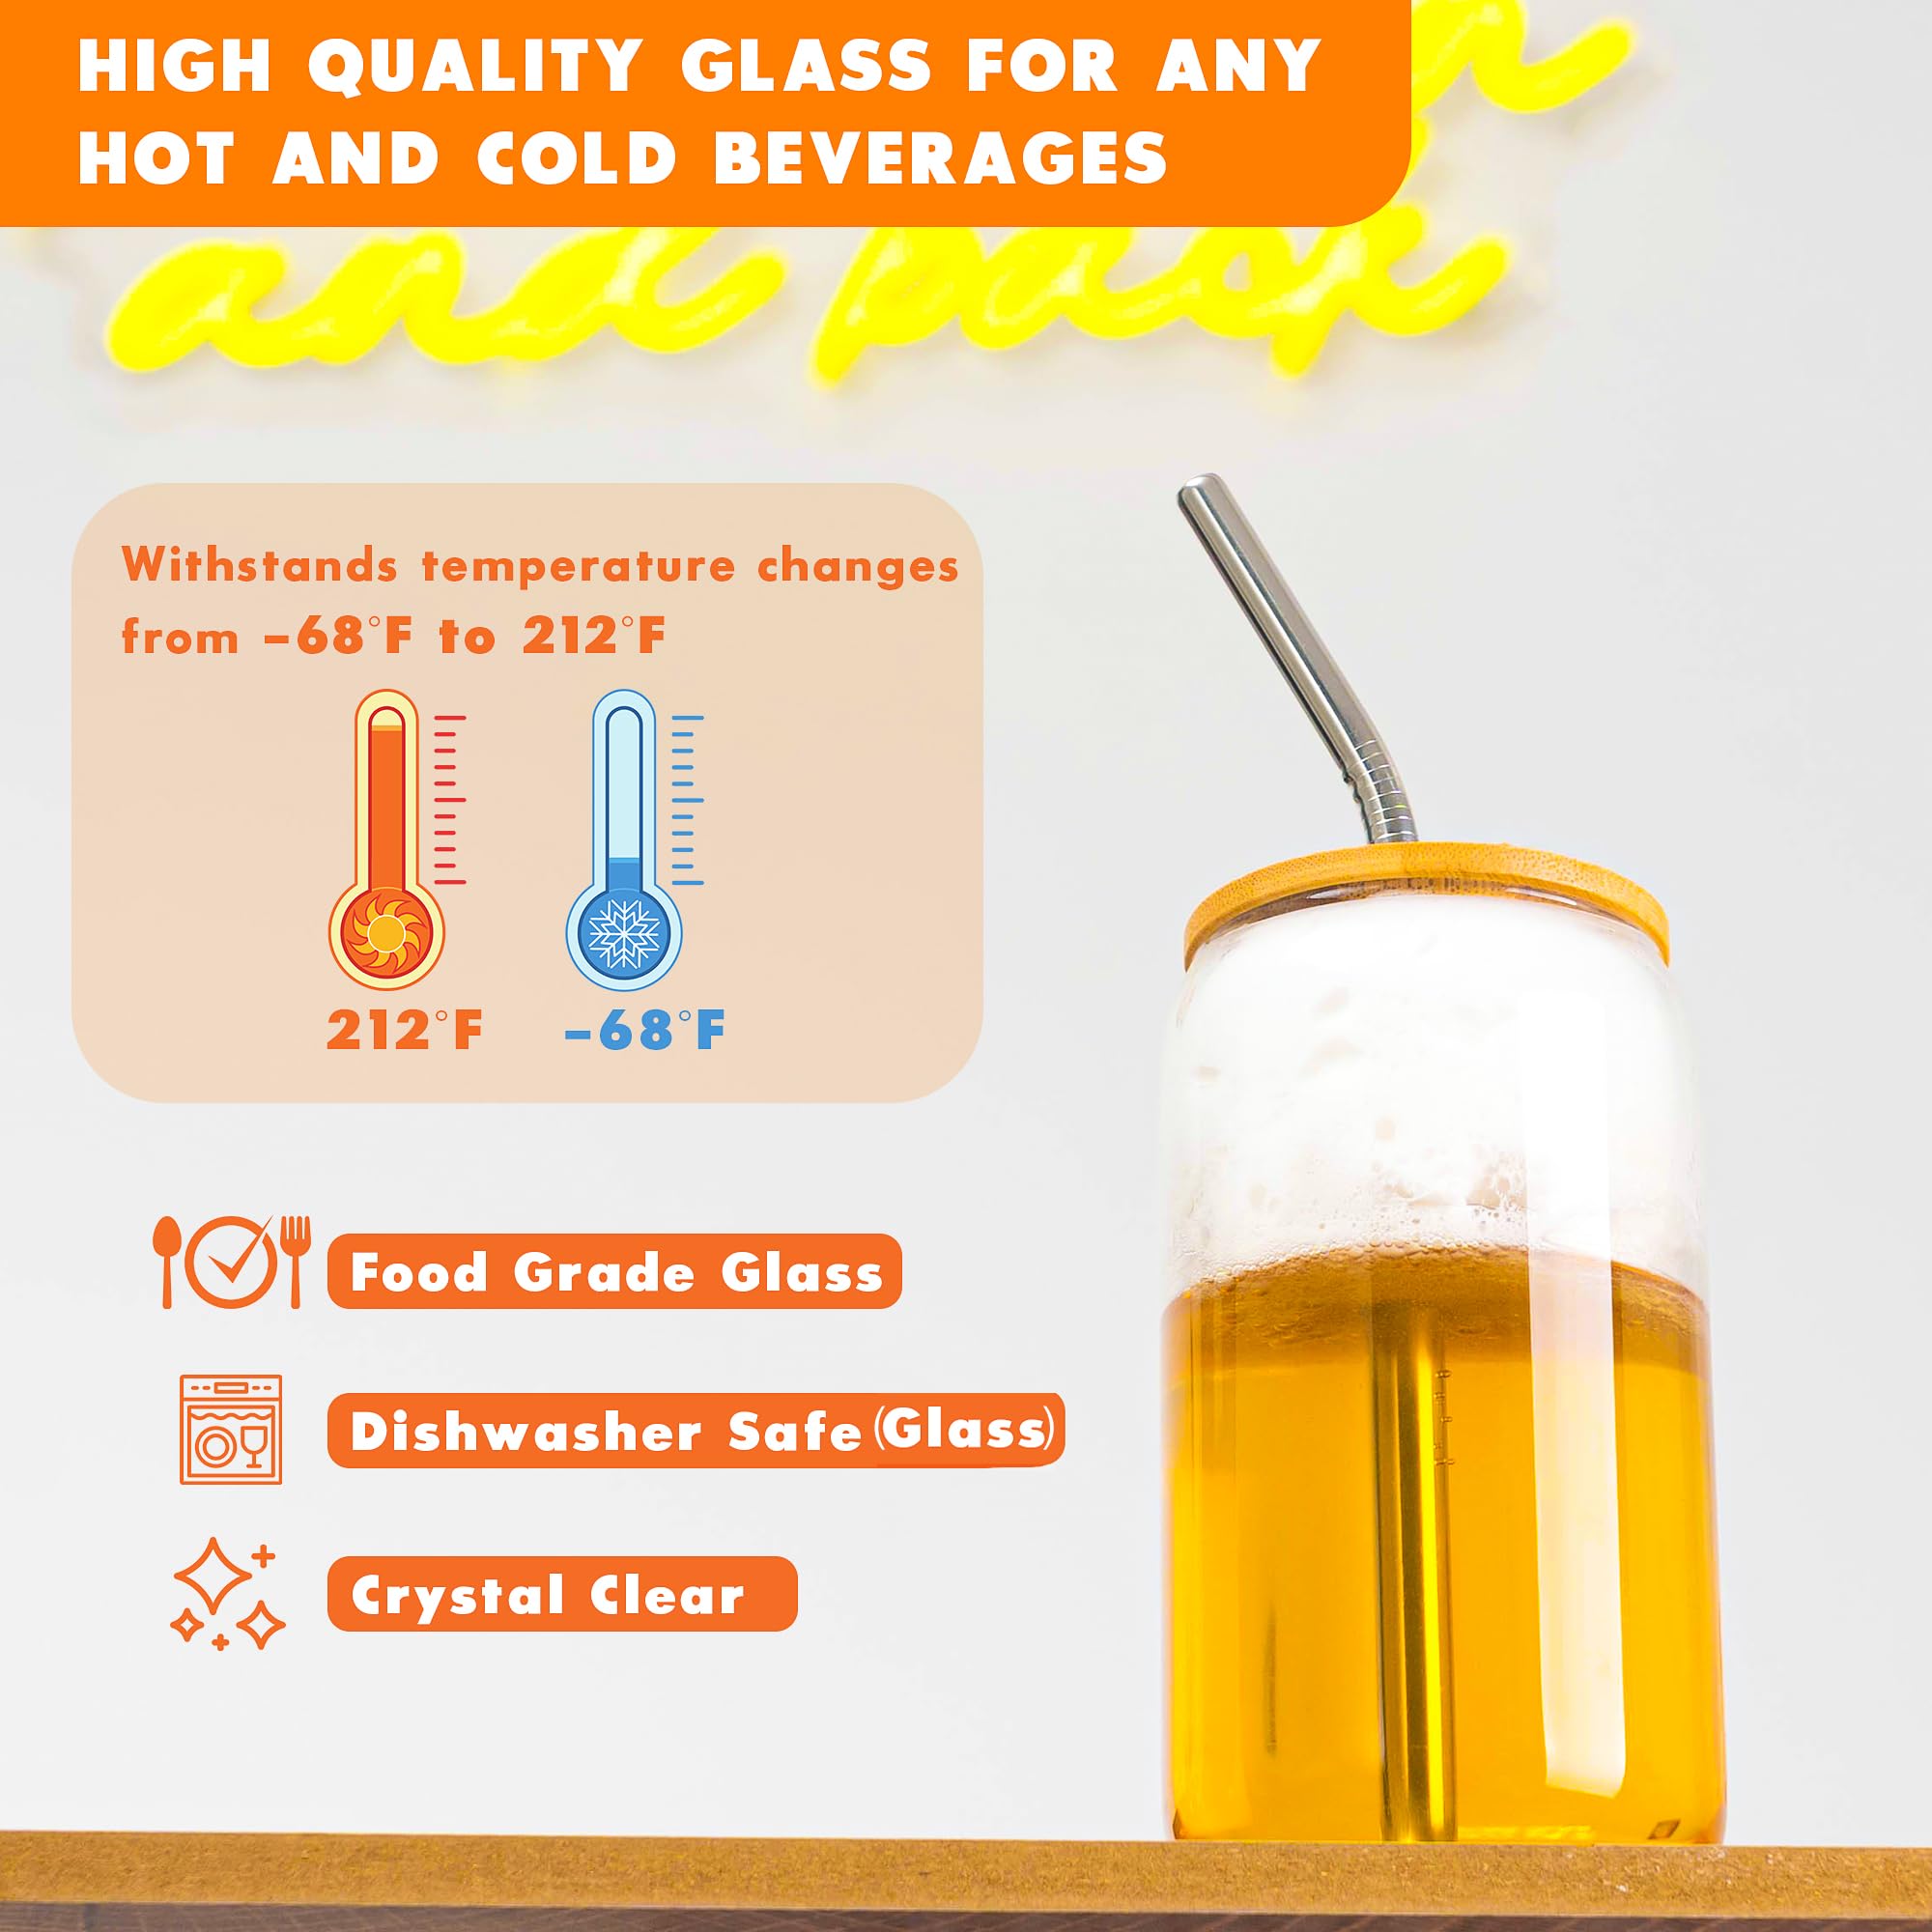 EMBICER Glass Cups with Lids and Straws – Set of 4 16Oz Mason Jar Drinking Glasses with Neoprene Sleeves – Premium Glass Cups with Bamboo Lids, Reusable Straw – Ideal for Iced Tea, Lemonade, Cocktail